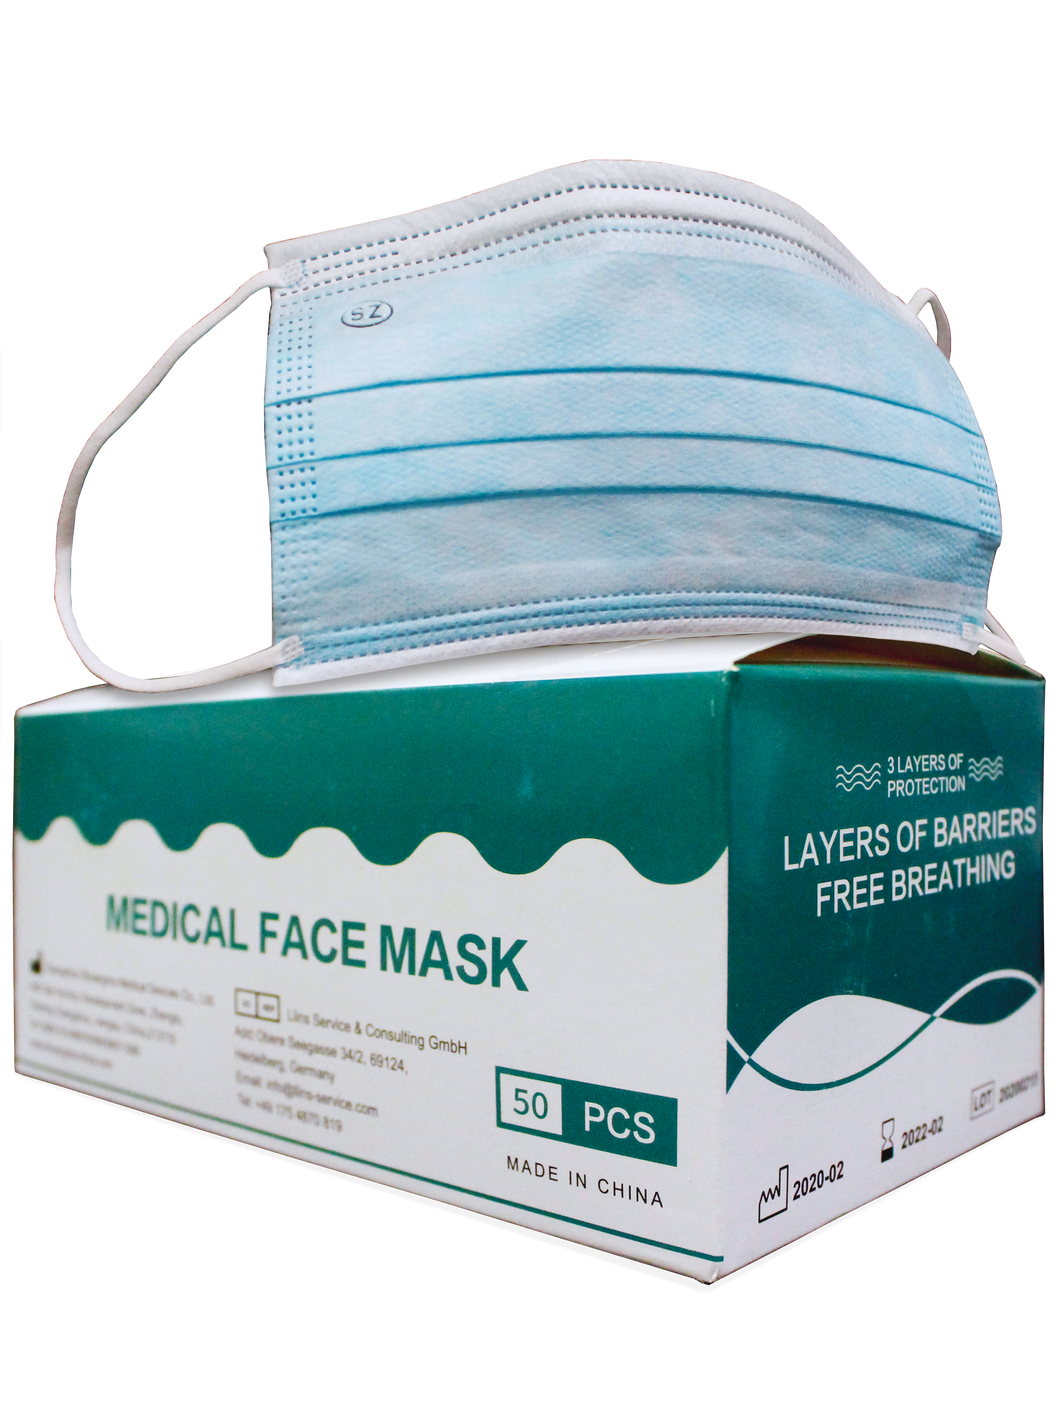 WHOLESALE Box of 50 3-Ply Face Masks